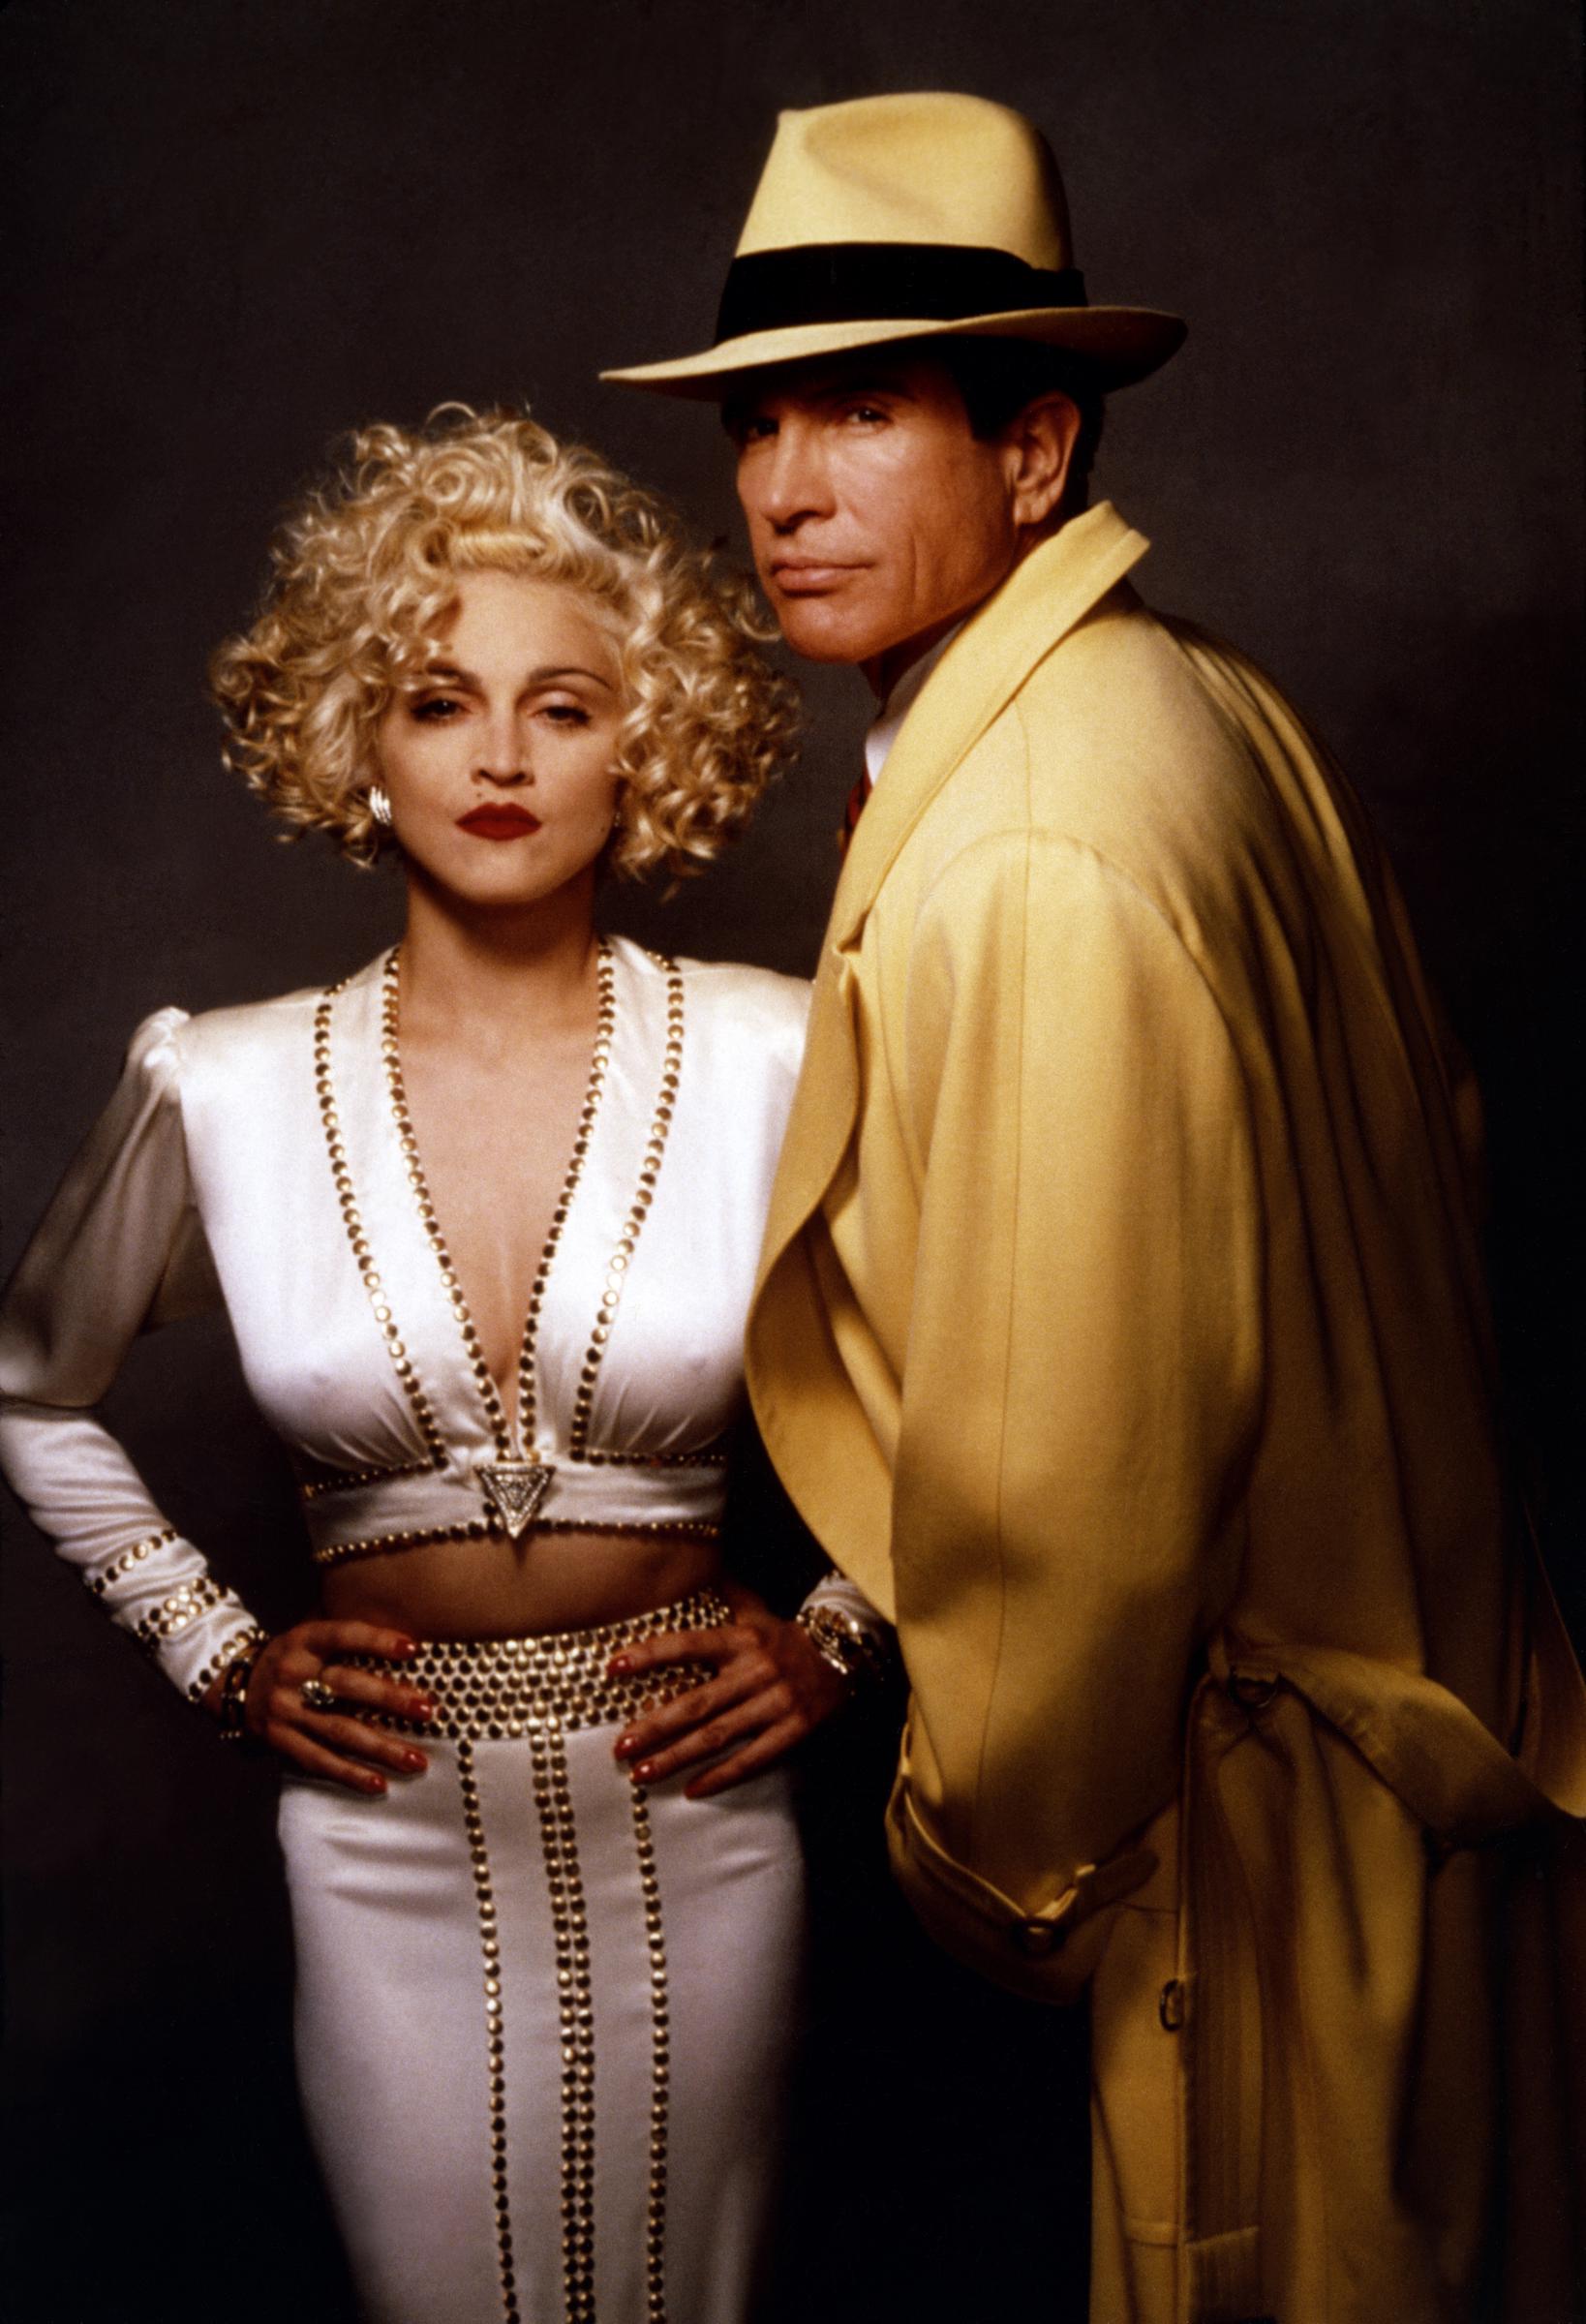 Madonna with Warren Beatty on the set of his movie 'Dick Tracy,' in 1990. | Source: Getty Images